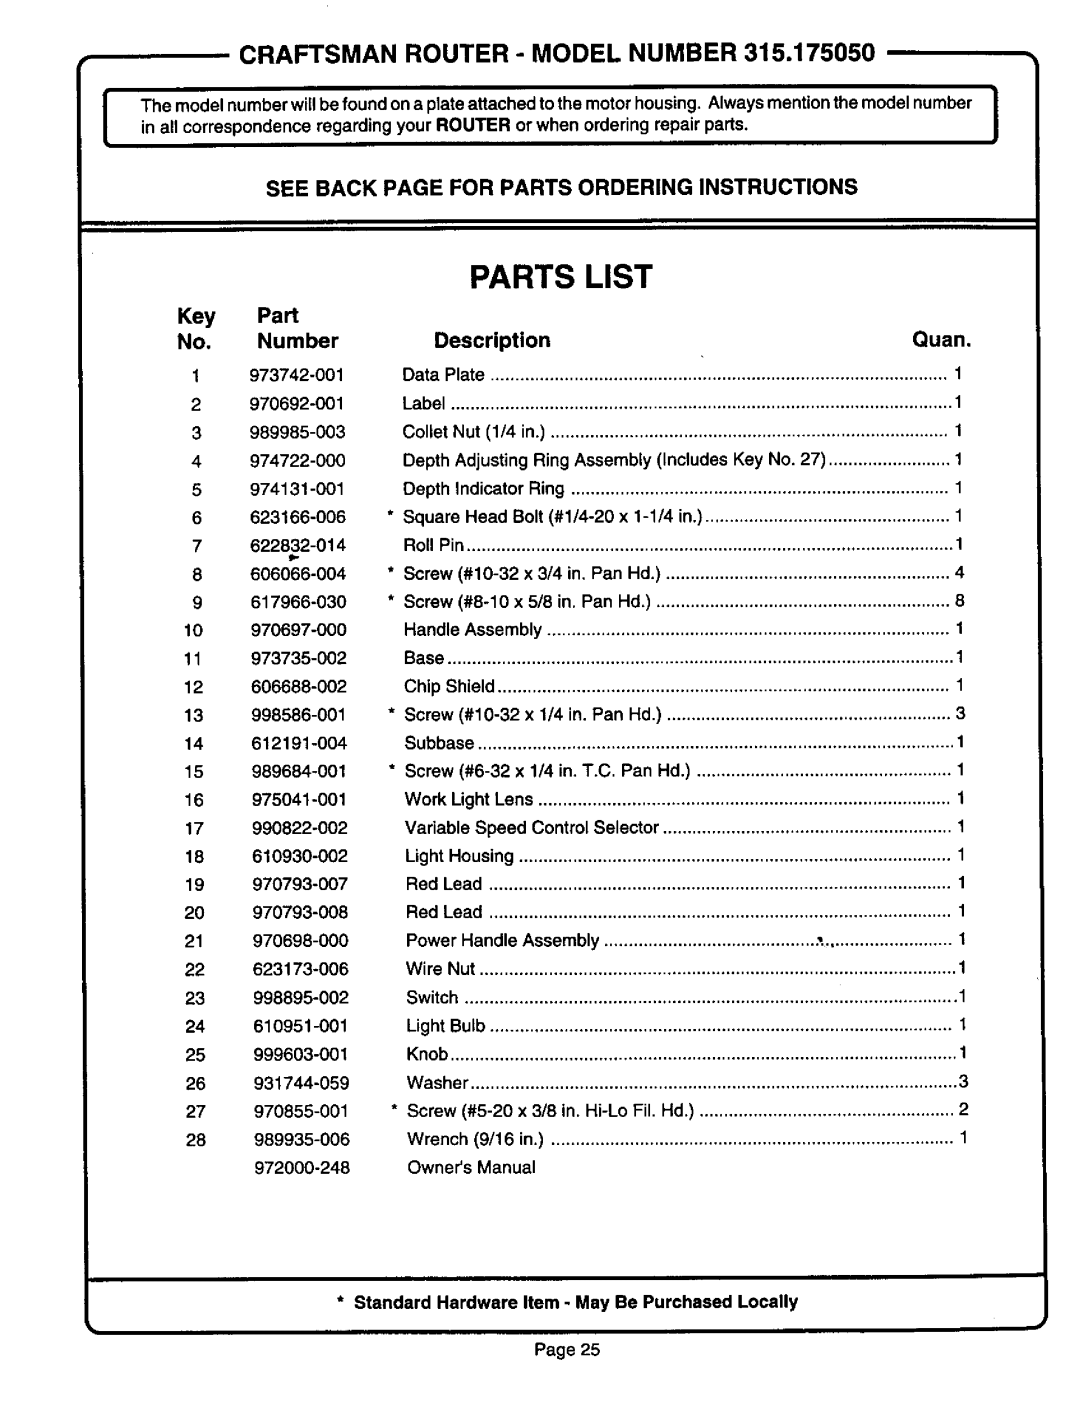 Sears 315.17505, 315.17504, 315.17506 owner manual Parts List, Craftsman Router - Model Number 